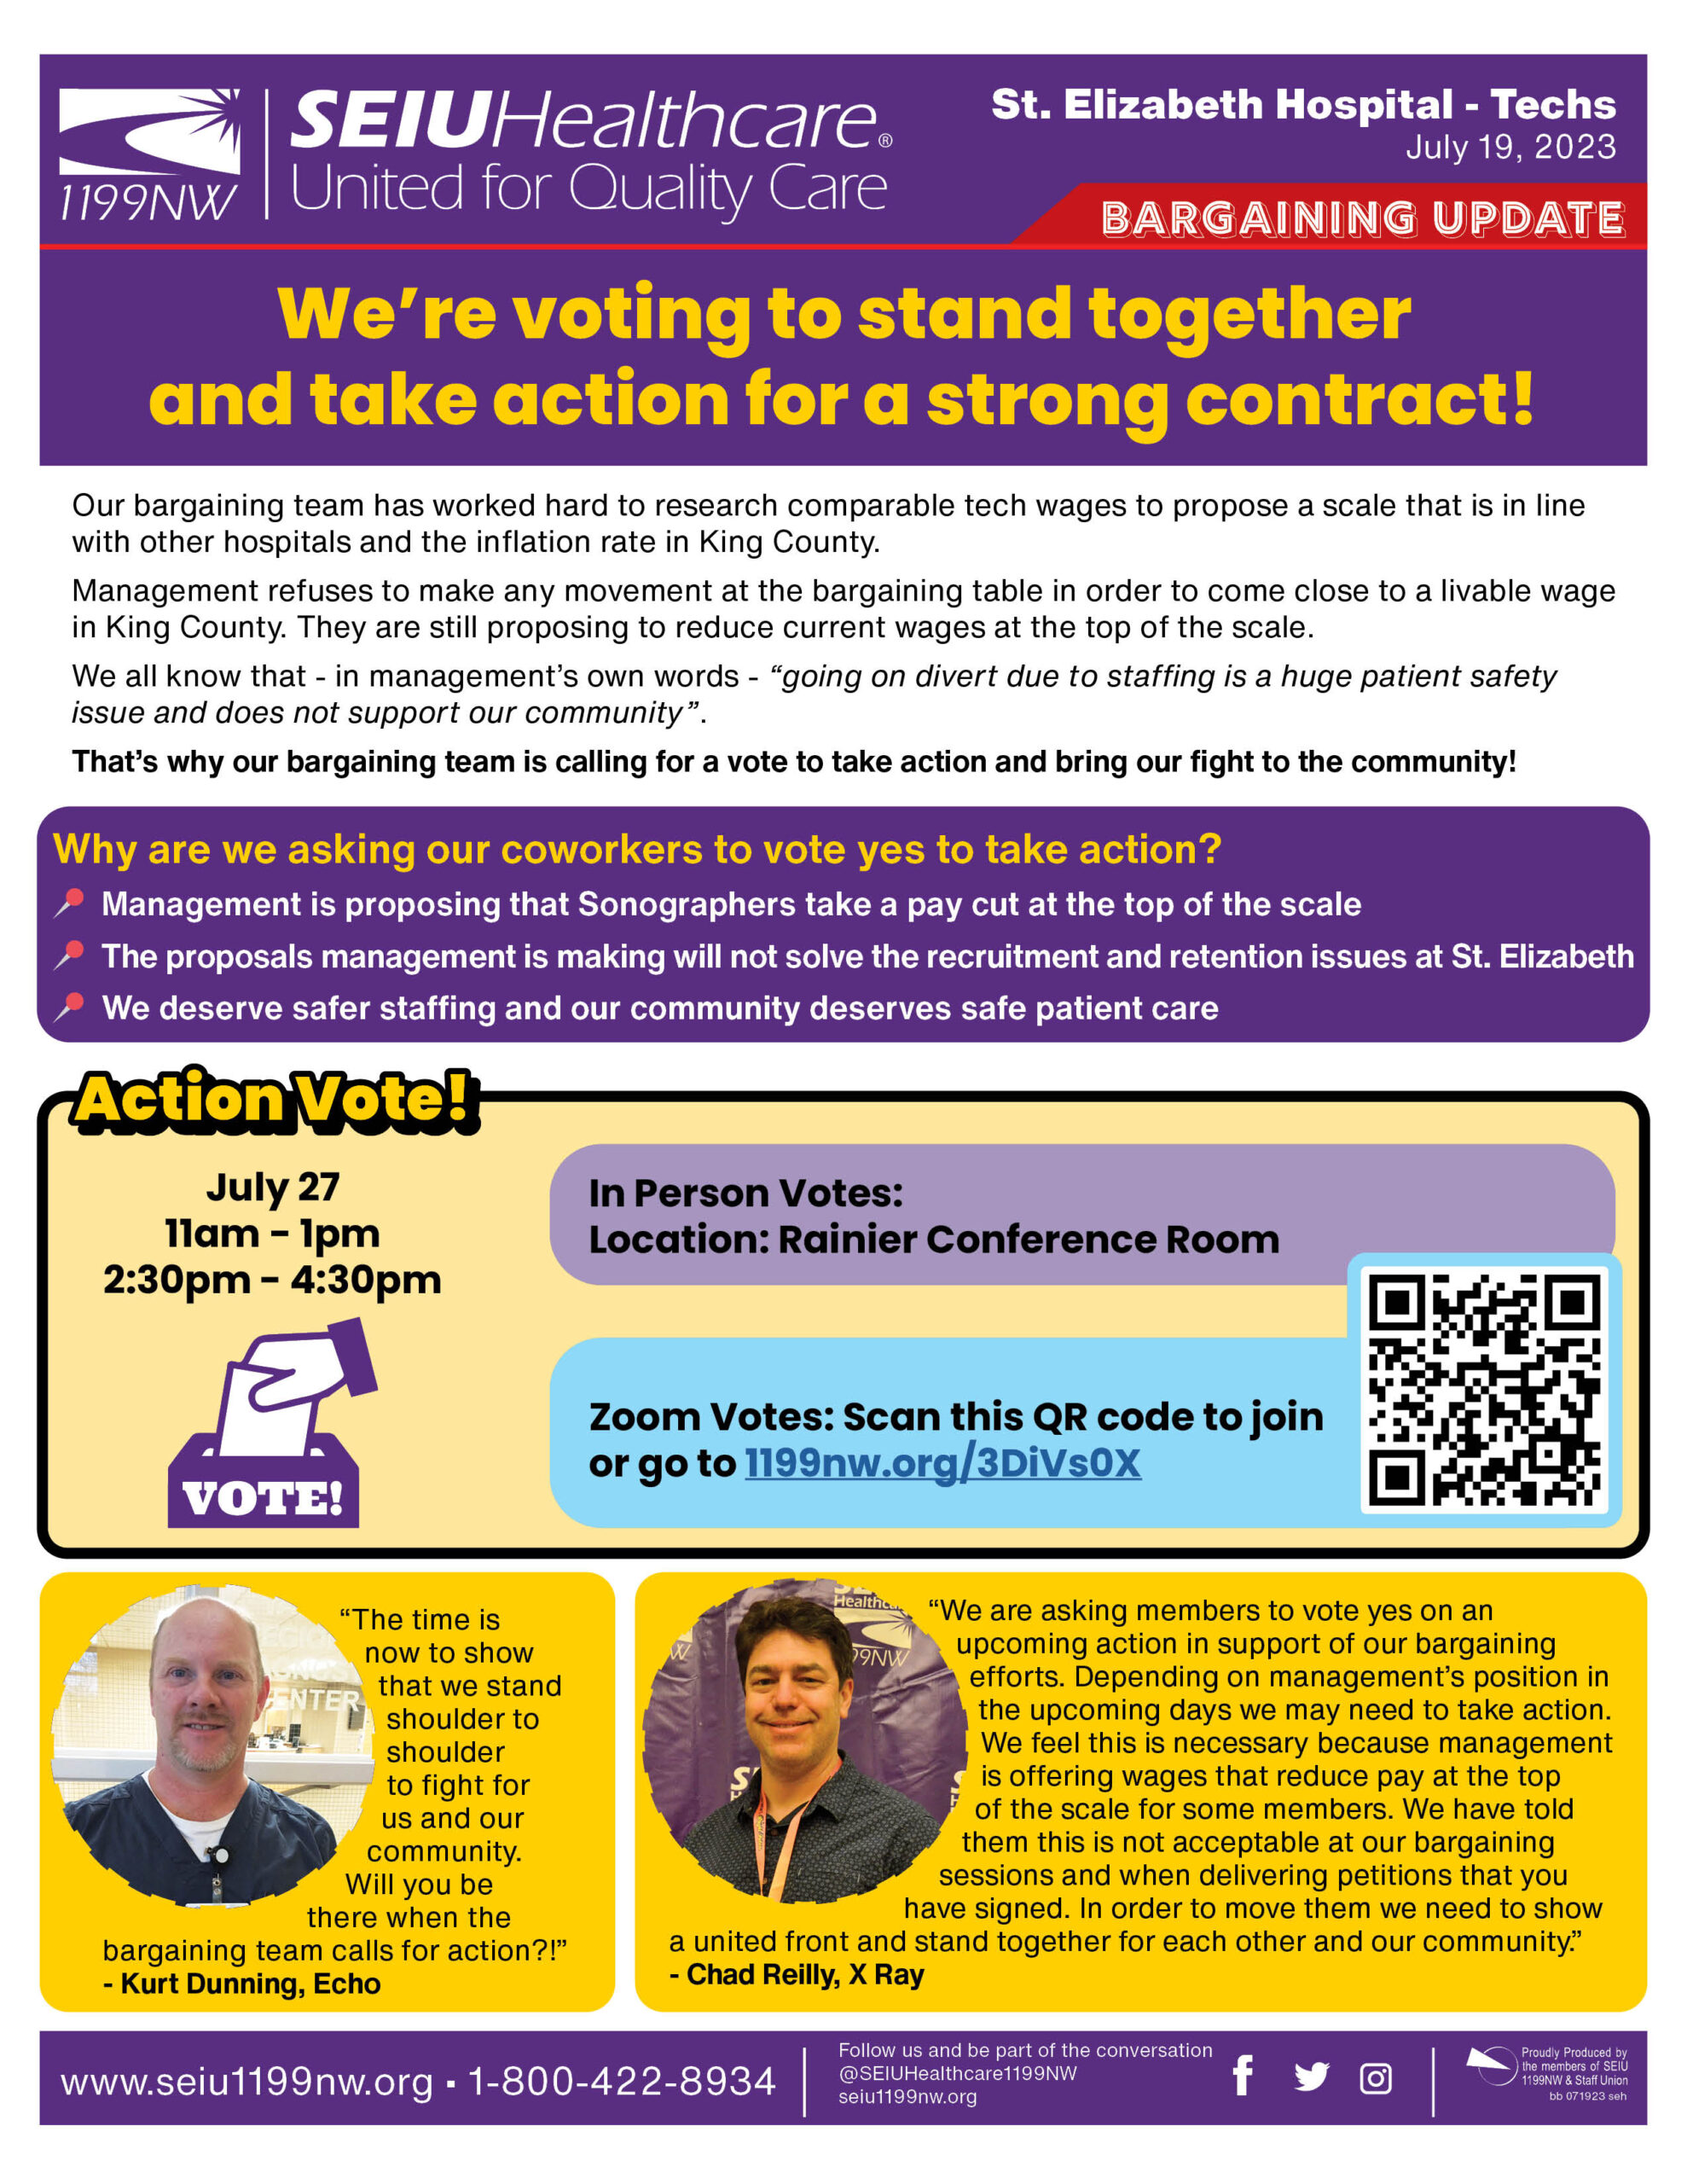 We’re voting to stand together and take action for a strong contract!